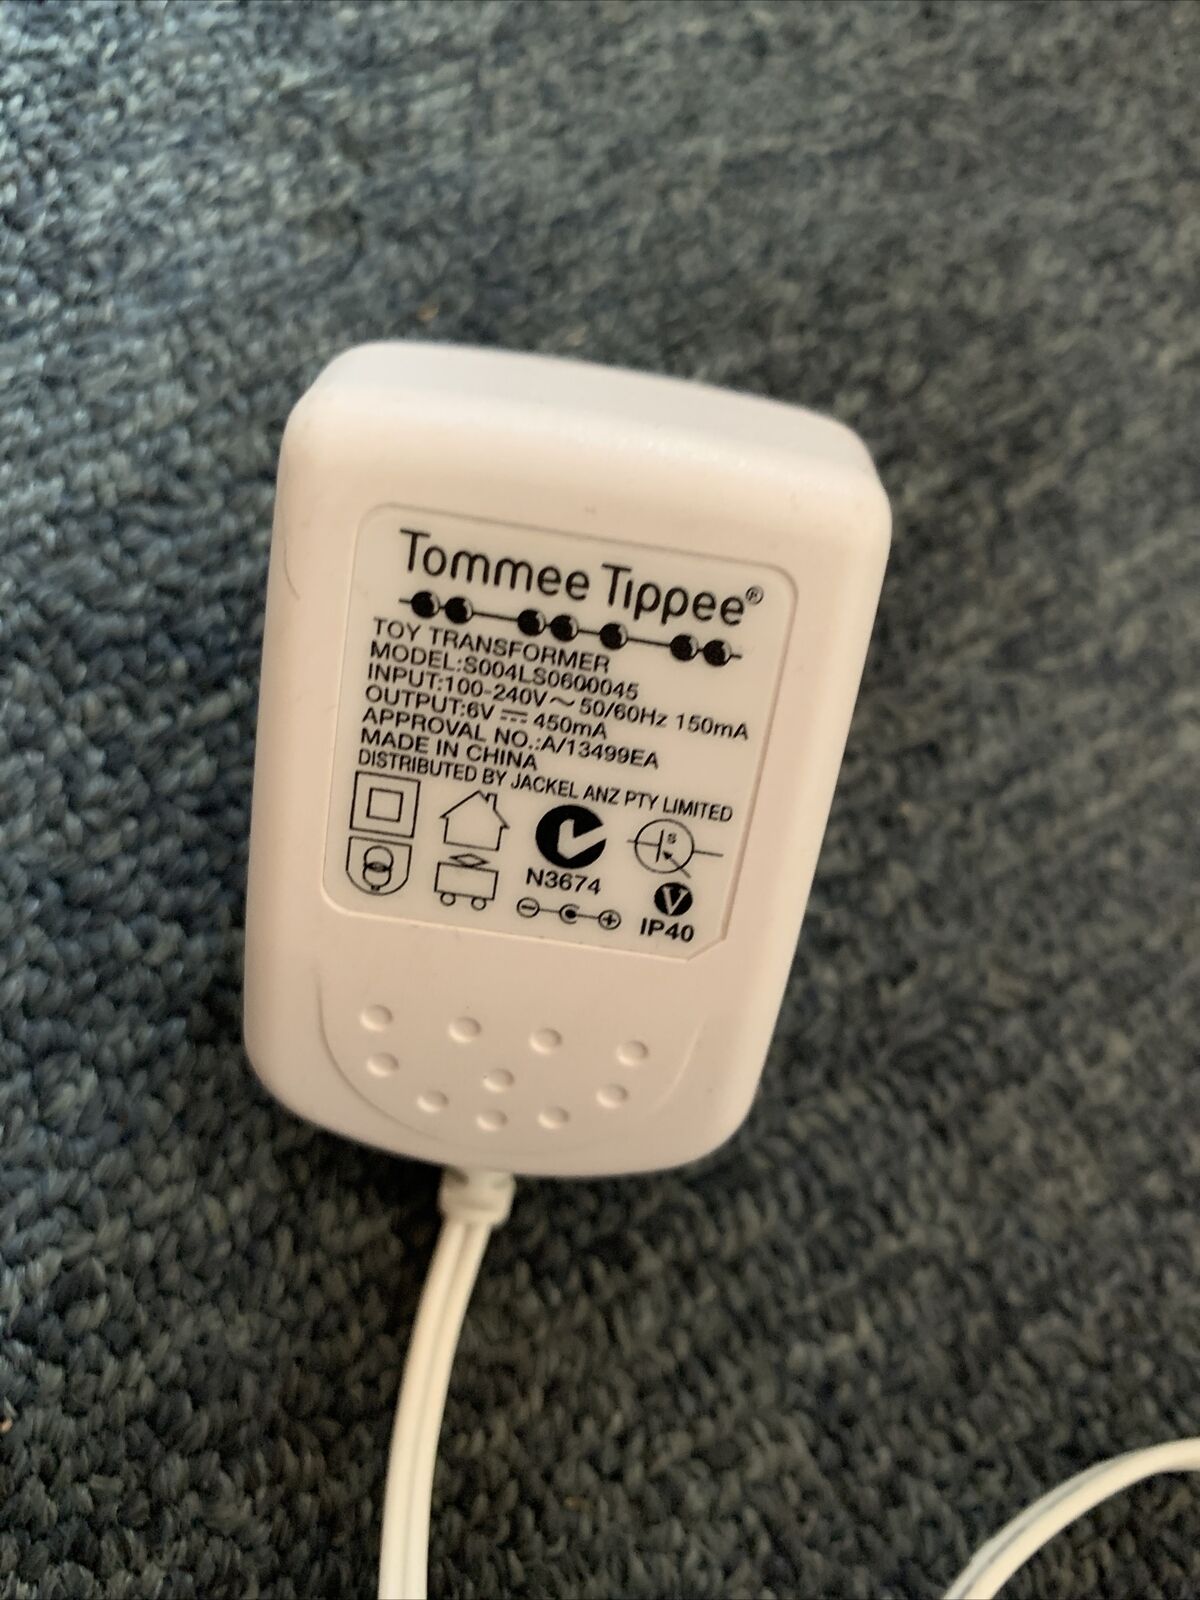 Tommee Tippee Toy Transformer S004LS0600045 AC Adapter 6V 450mA Colour: White Compatible Brand: Tommee Tippee Type: - Click Image to Close